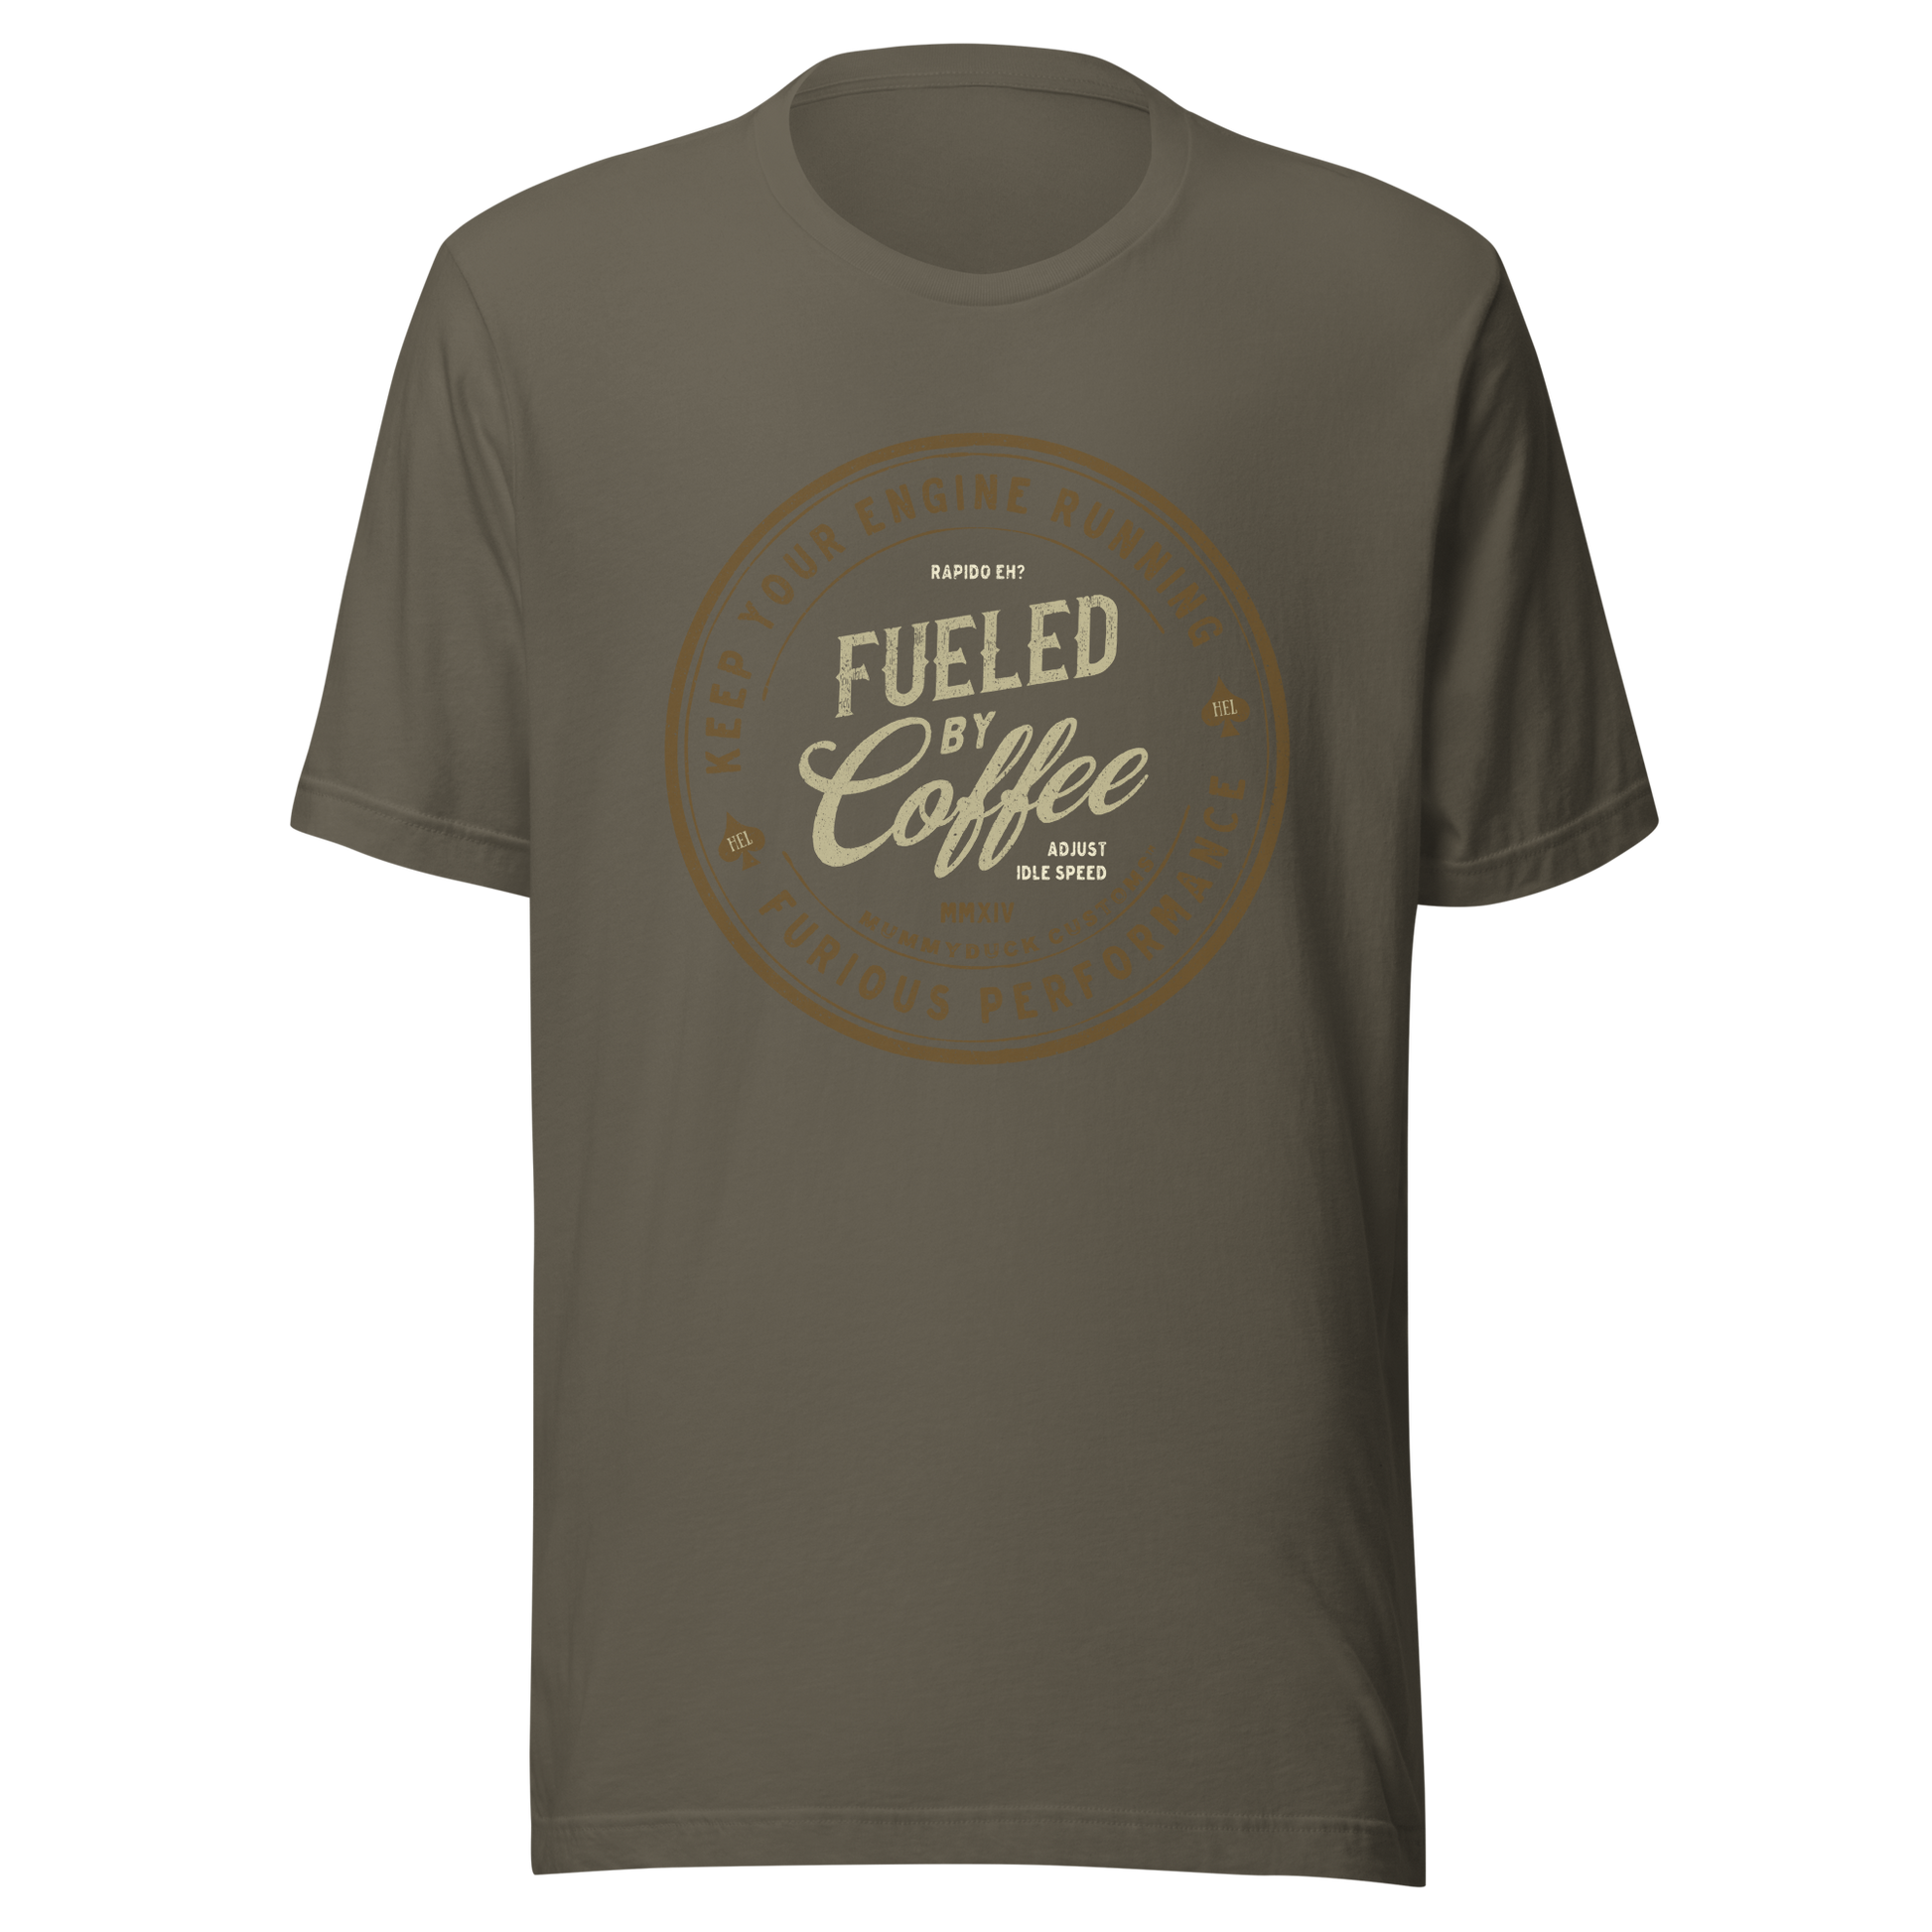 Fueled By Coffee t-shirt Idle Speed Shirt Coffee Drinking Shirts Fueled By Coffee Shirt Vintage Coffee Shirt Dad Fuel Mom Fuel Biker Fuel Shirt